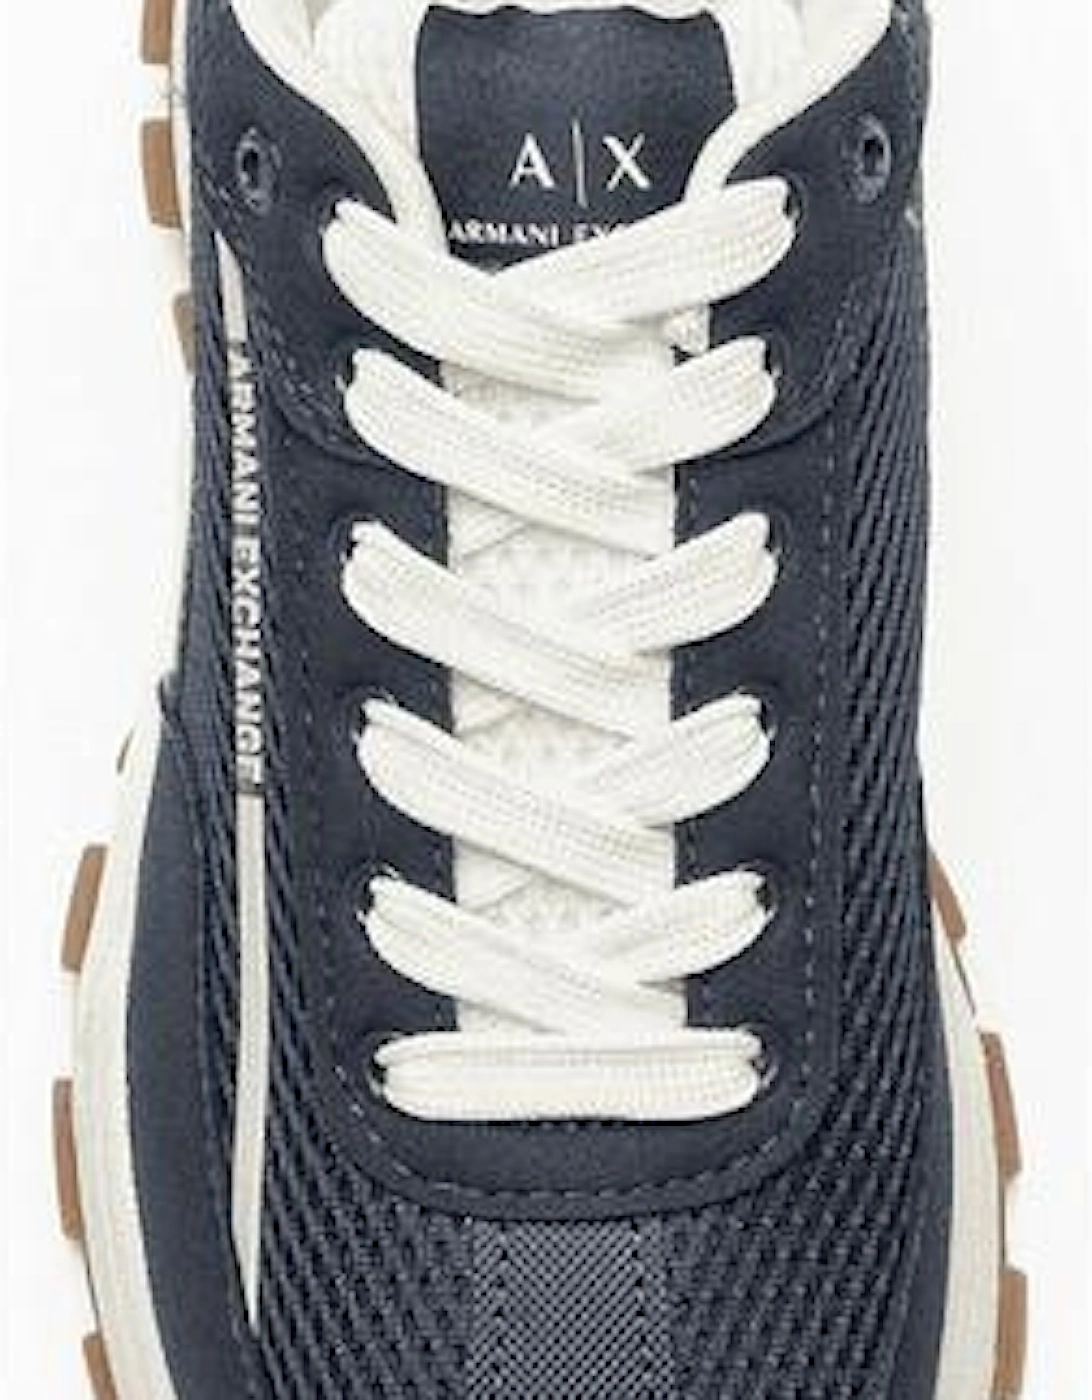 Chunky Sole Mesh/Suede Navy Trainer